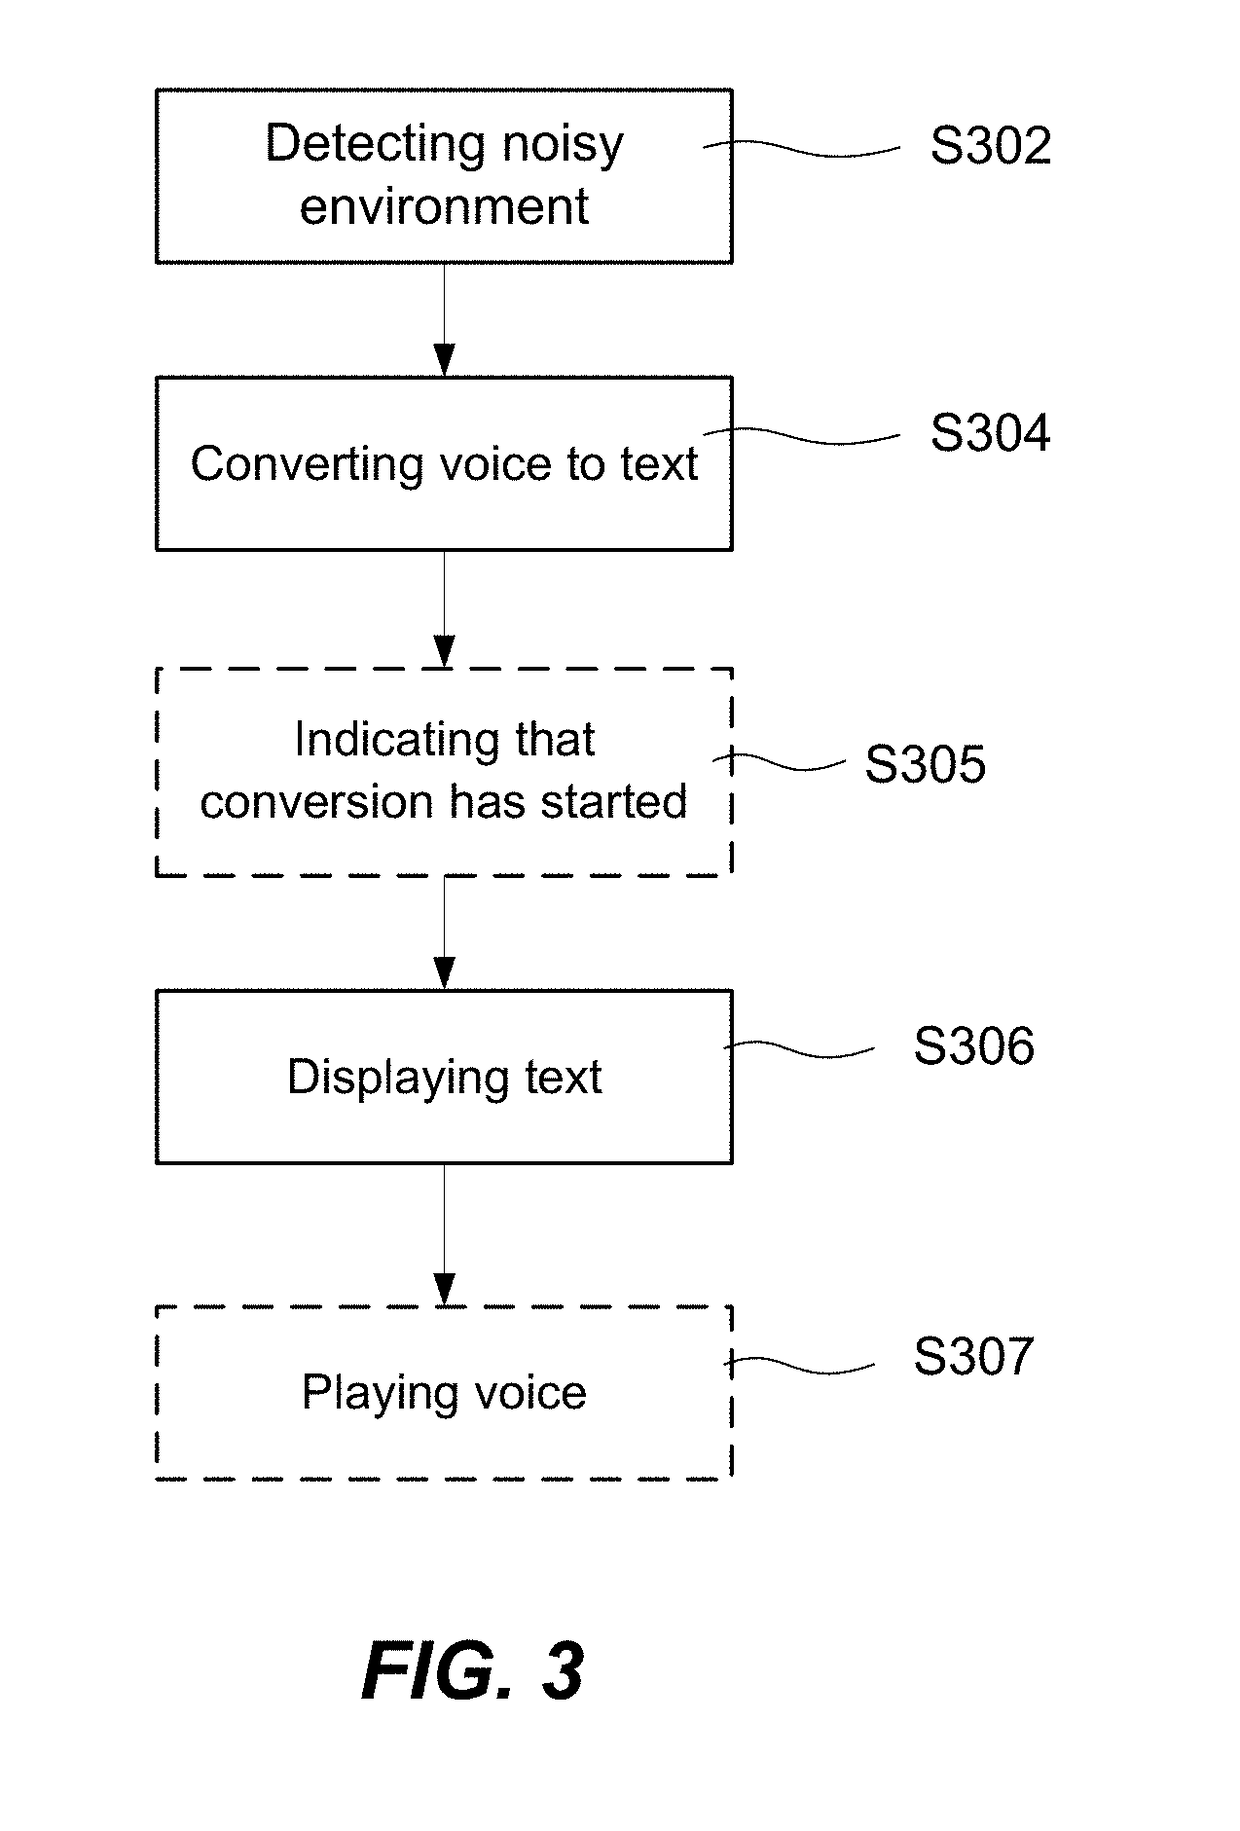 Transferring information from a sender to a recipient during a telephone call under noisy environment